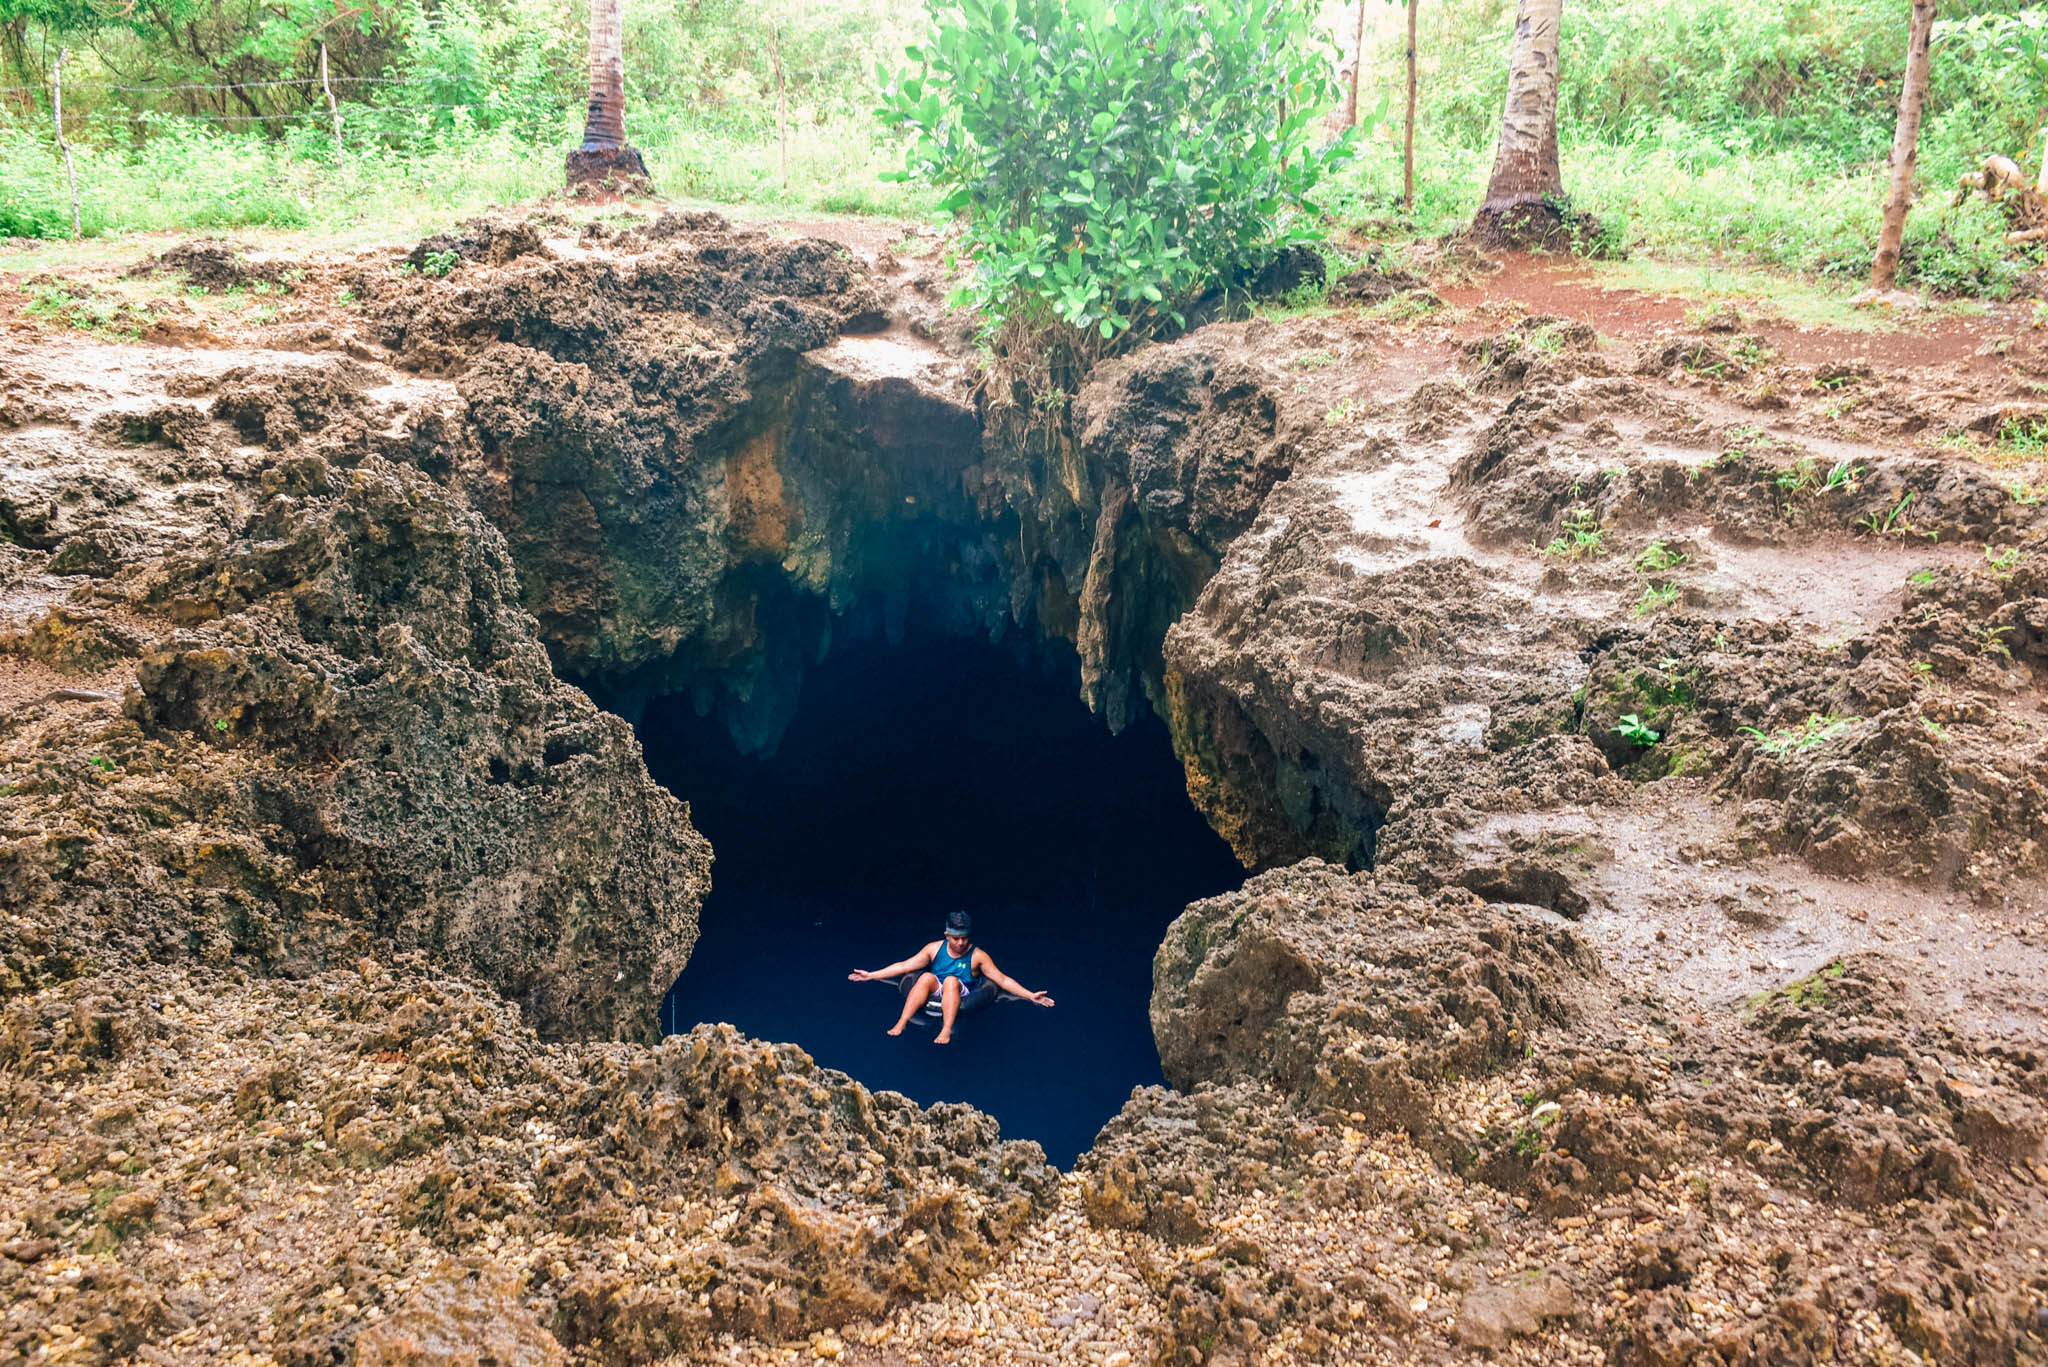 BOHOL: ANDA CAVE POOL (HOW TO GET THERE)